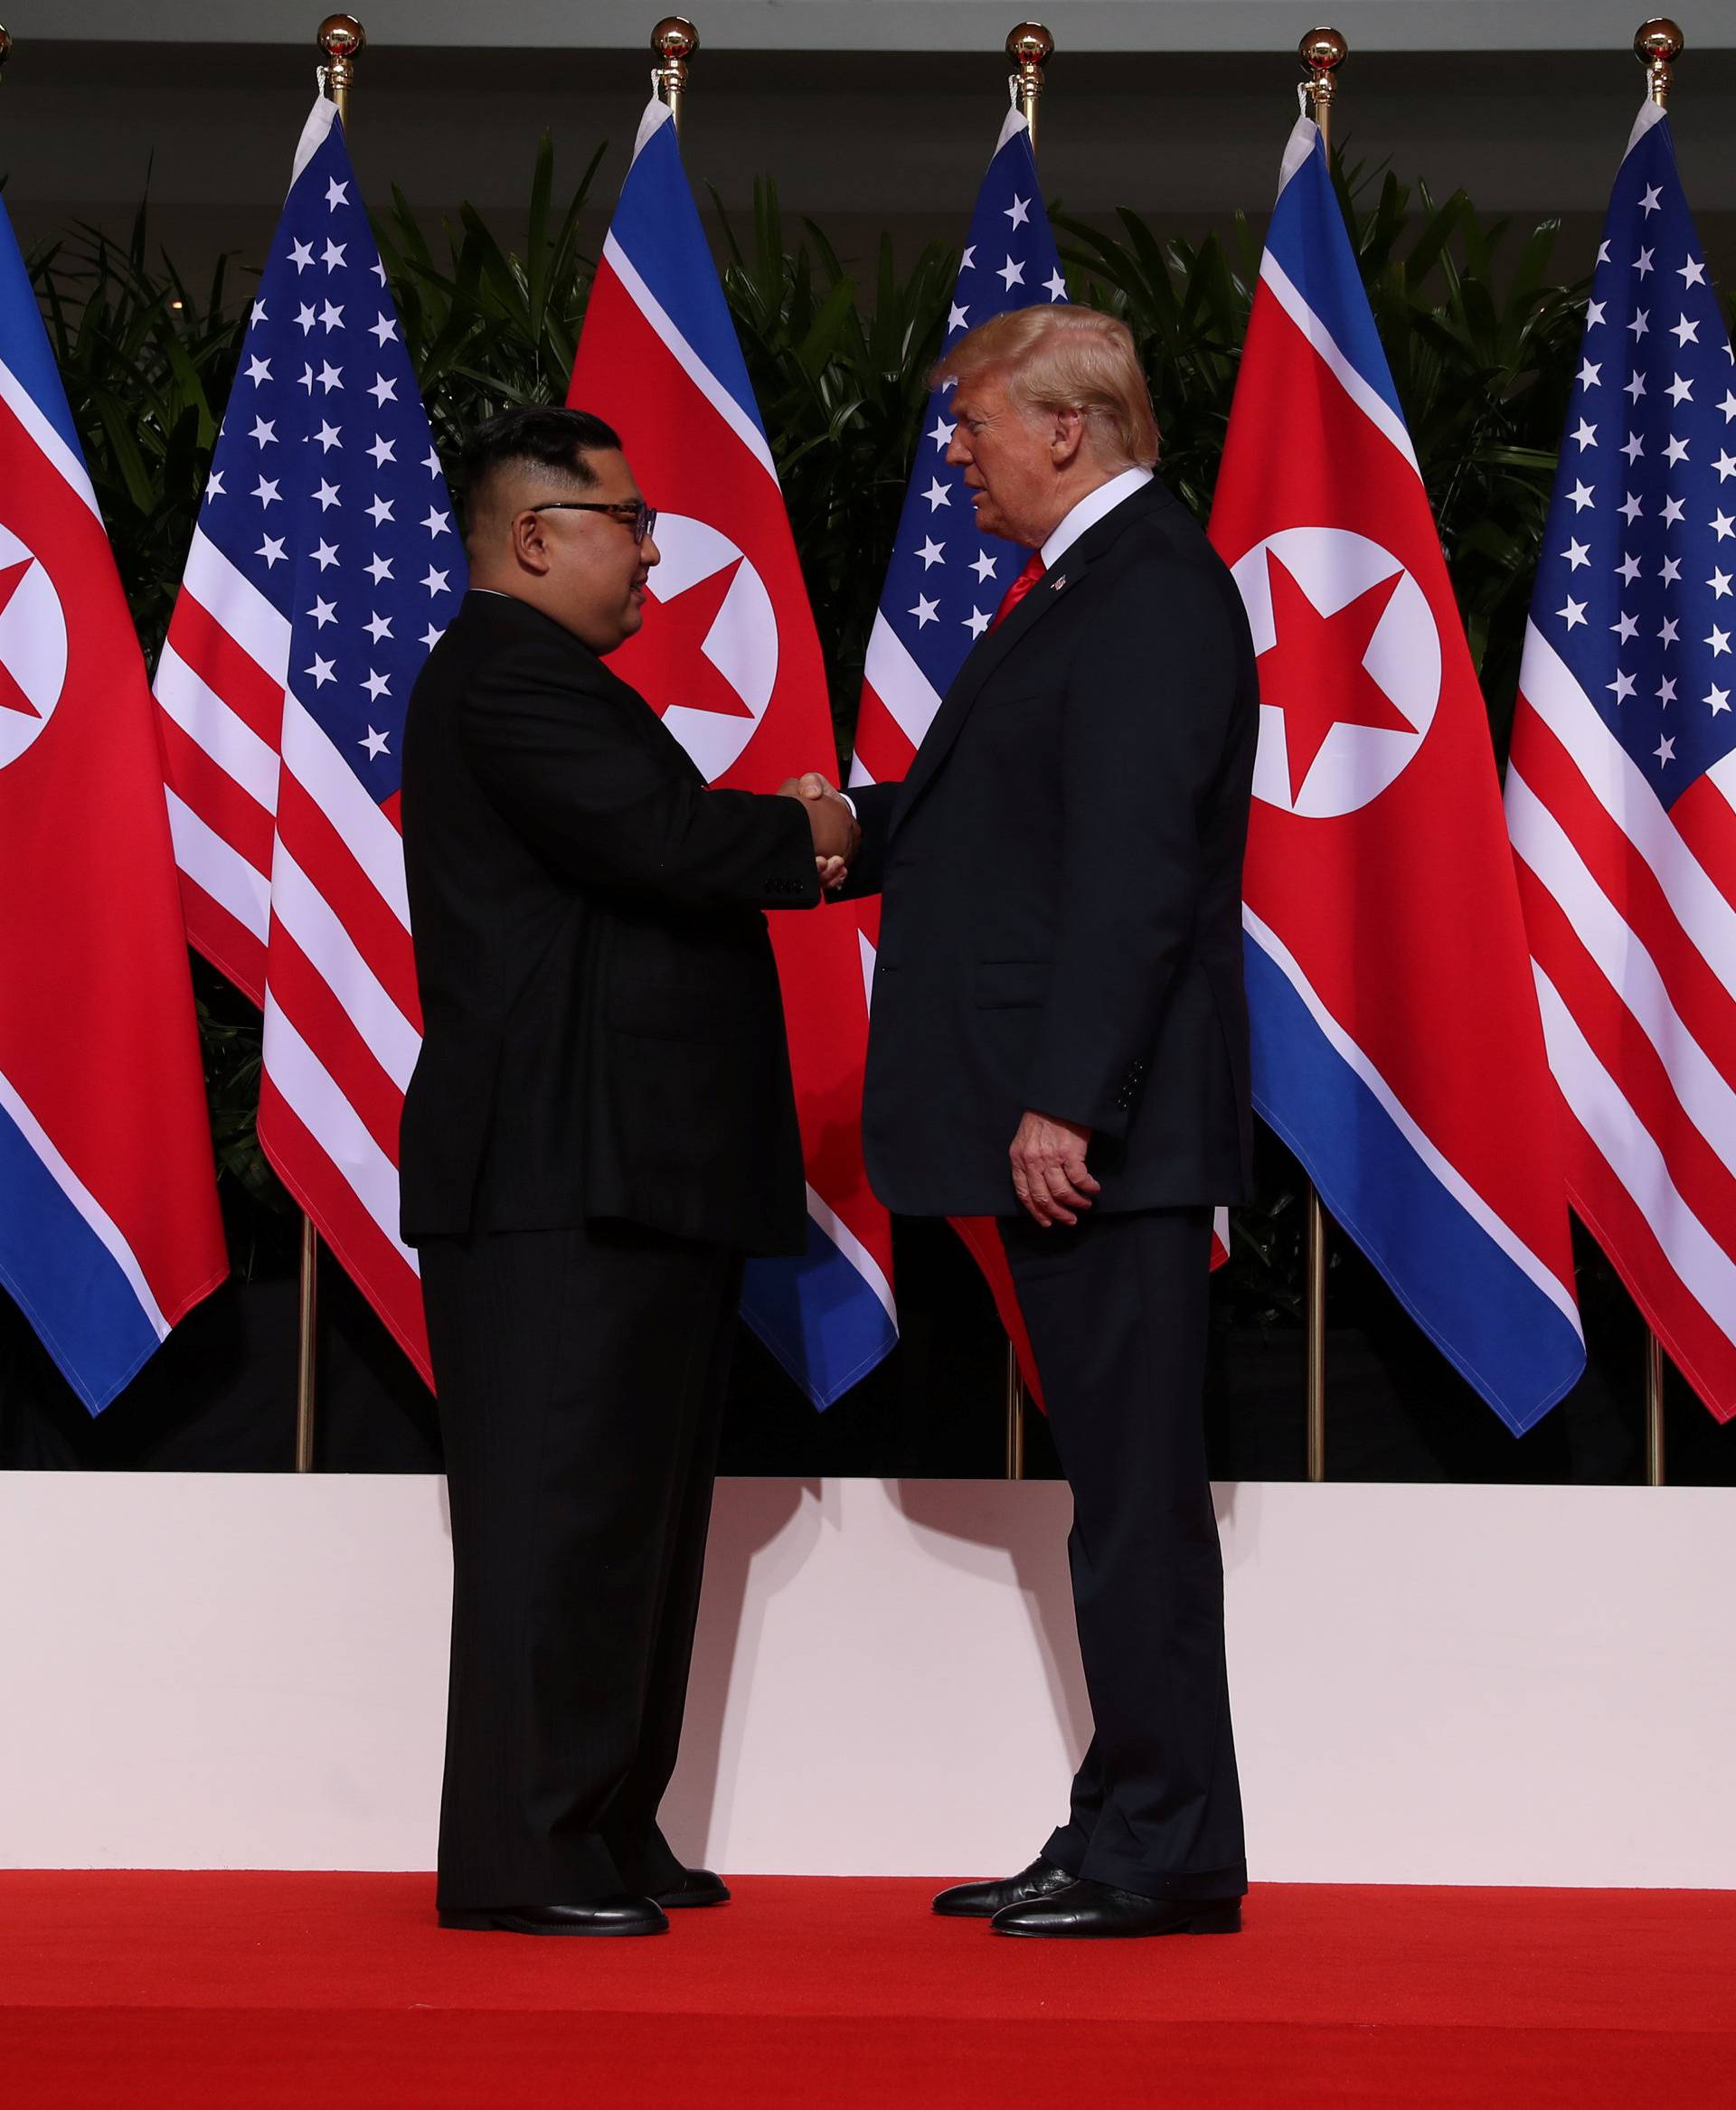 U.S. President Donald Trump shakes hands with North Korean leader Kim Jong Un at the Capella Hotel on Sentosa island in Singapore